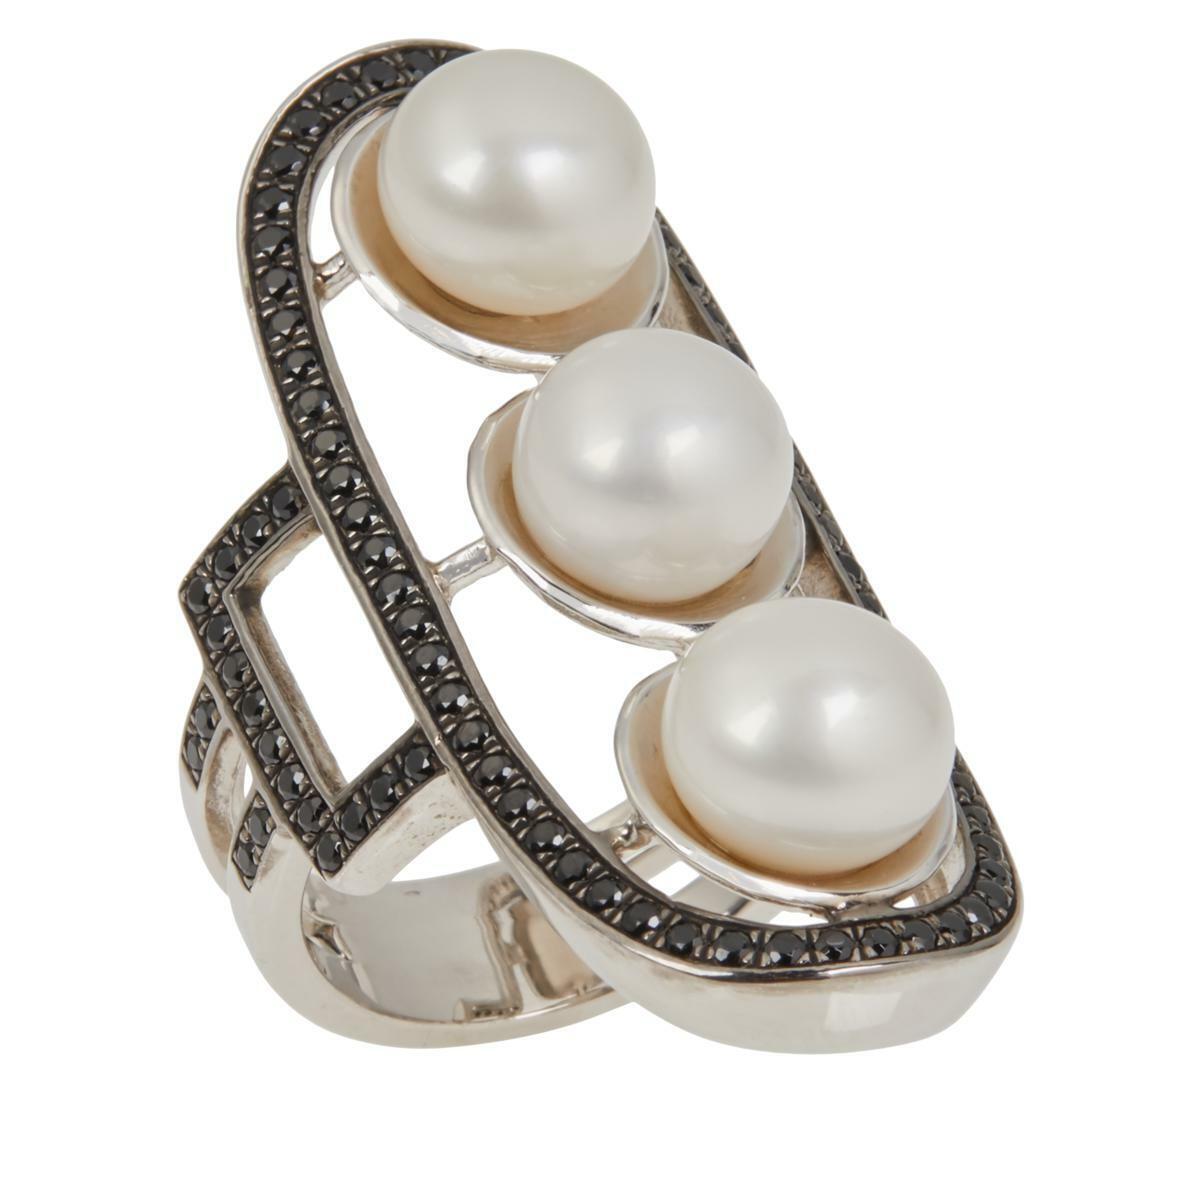 Deb Guyot Studio Cultured Pearl and Black Spinel Statement Ring, Size 6